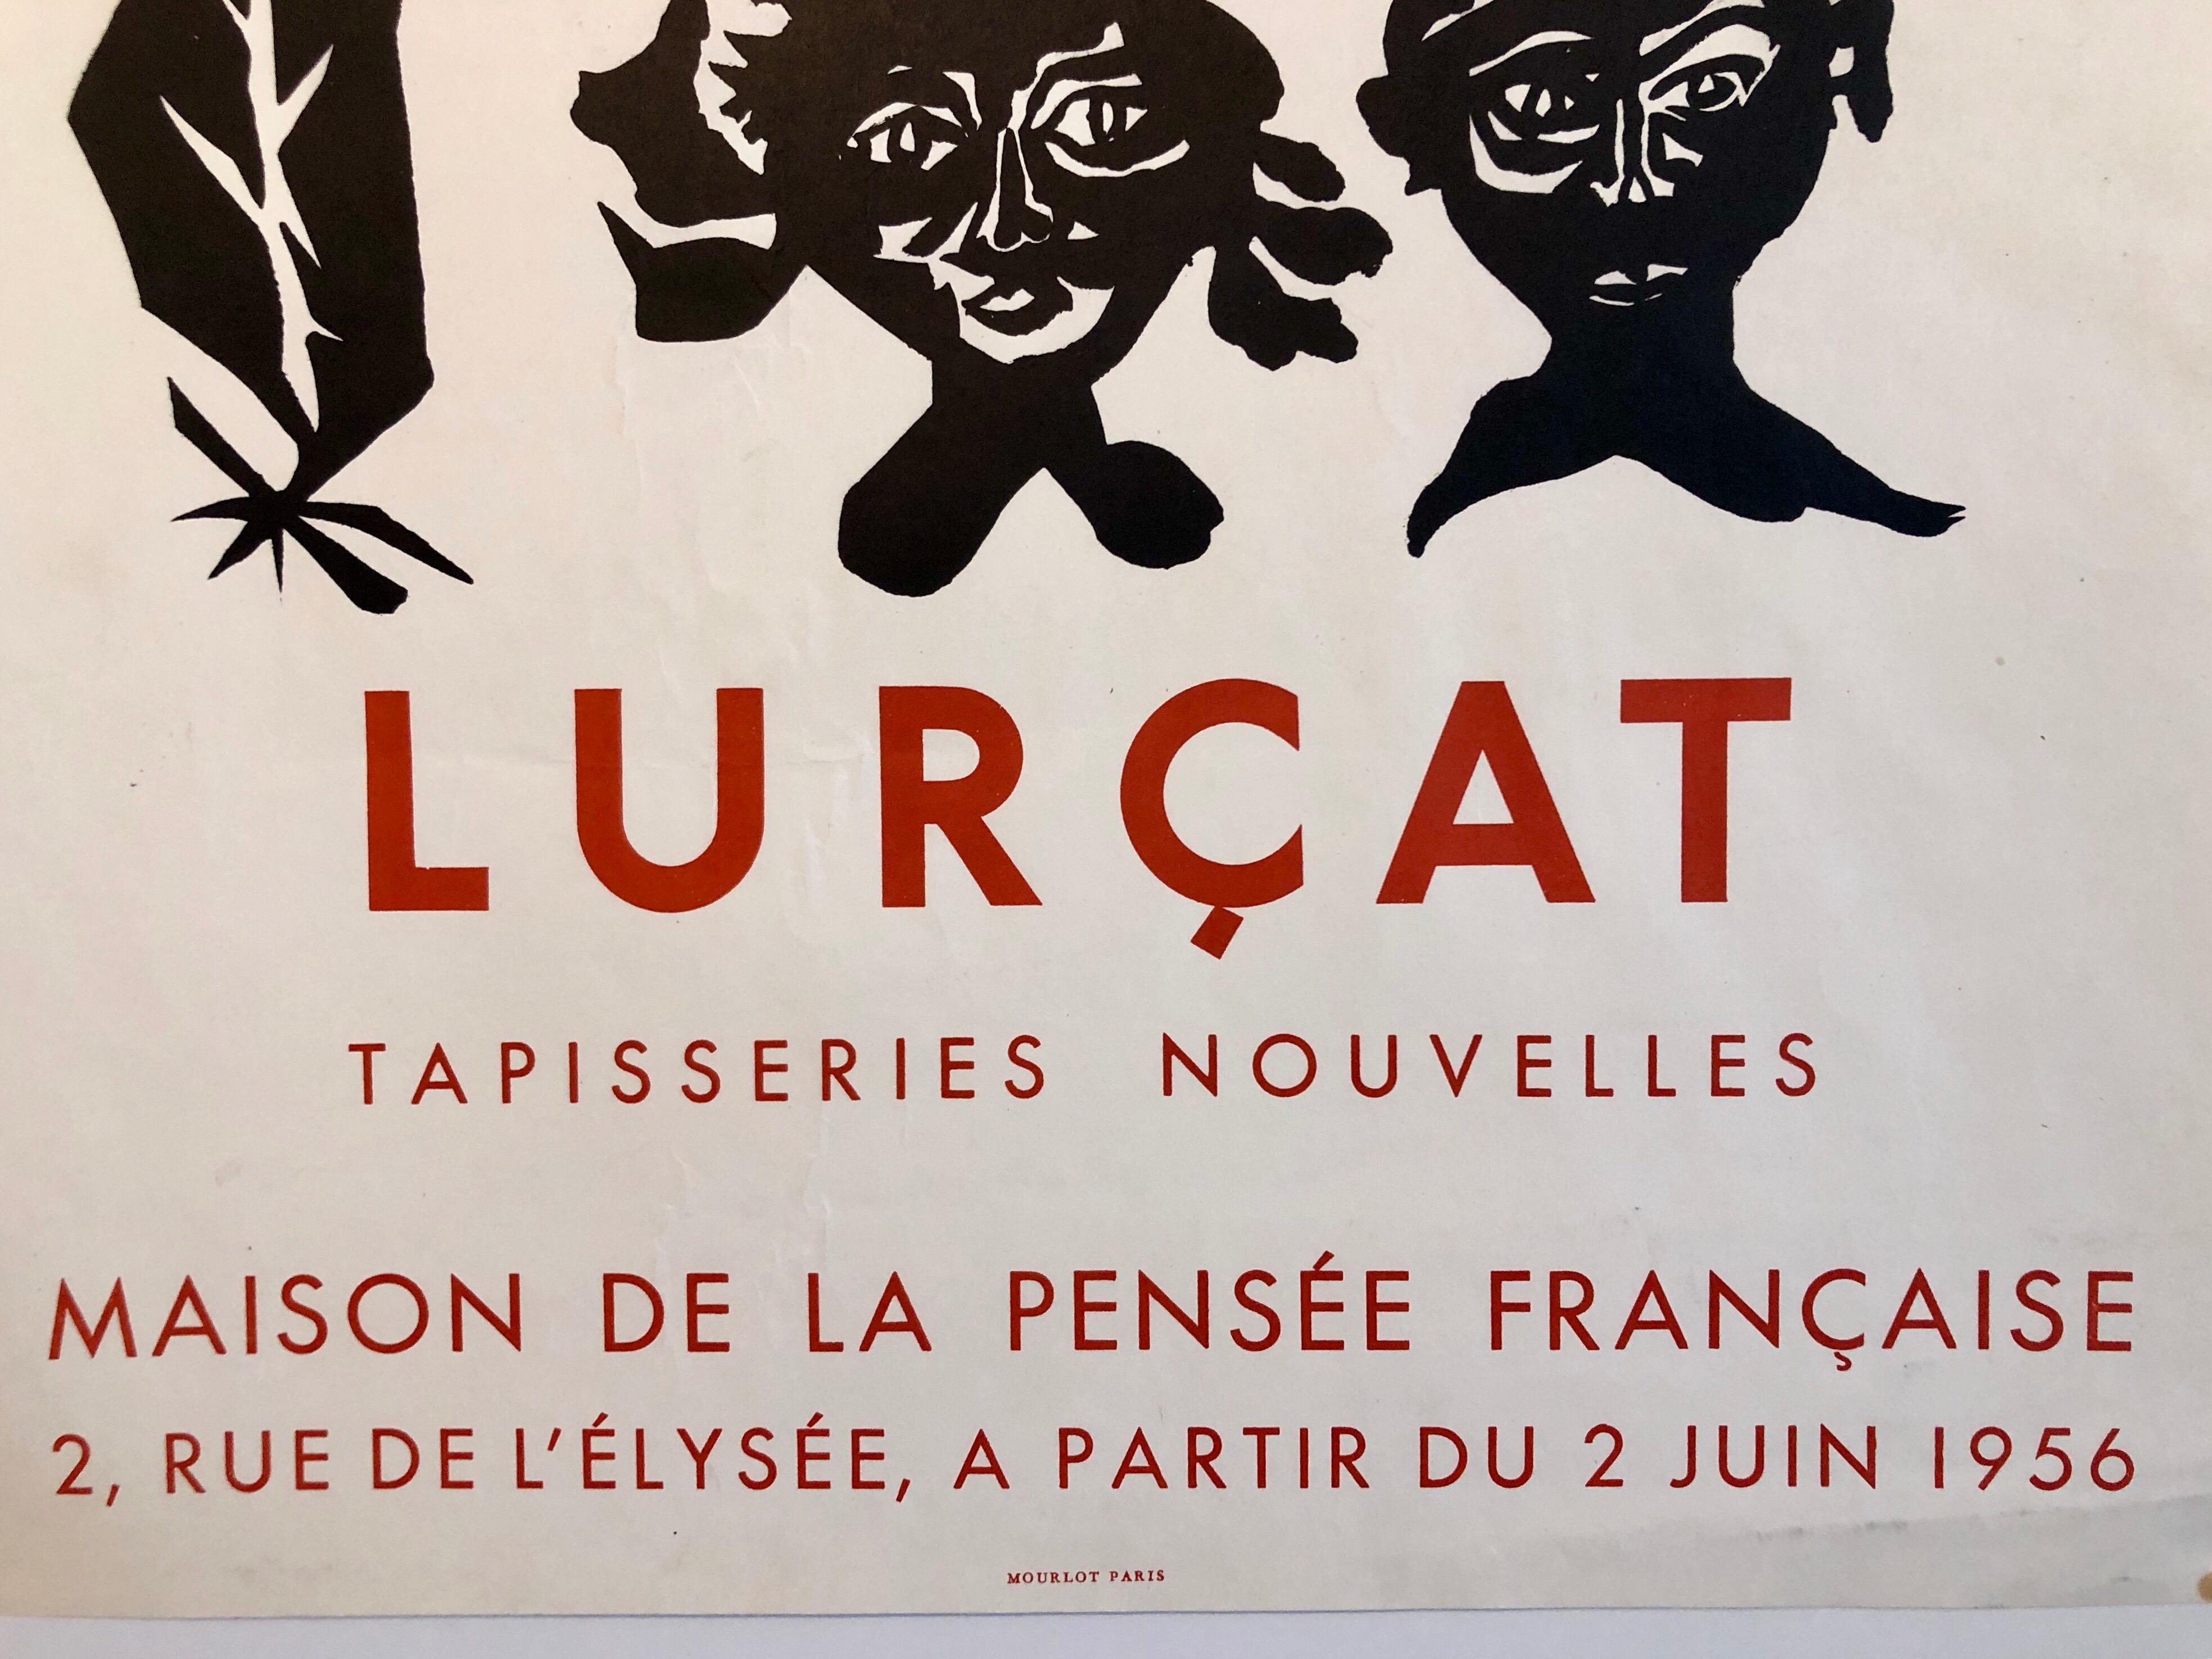 Vintage affiche poster. this is not hand signed or numbered. It is an original lithograph or silkscreen printed at Mourlot in Paris. 
Jean Lurcat (French: 1892 – 1966) was a French artist noted for his role in the revival of contemporary Aubusson